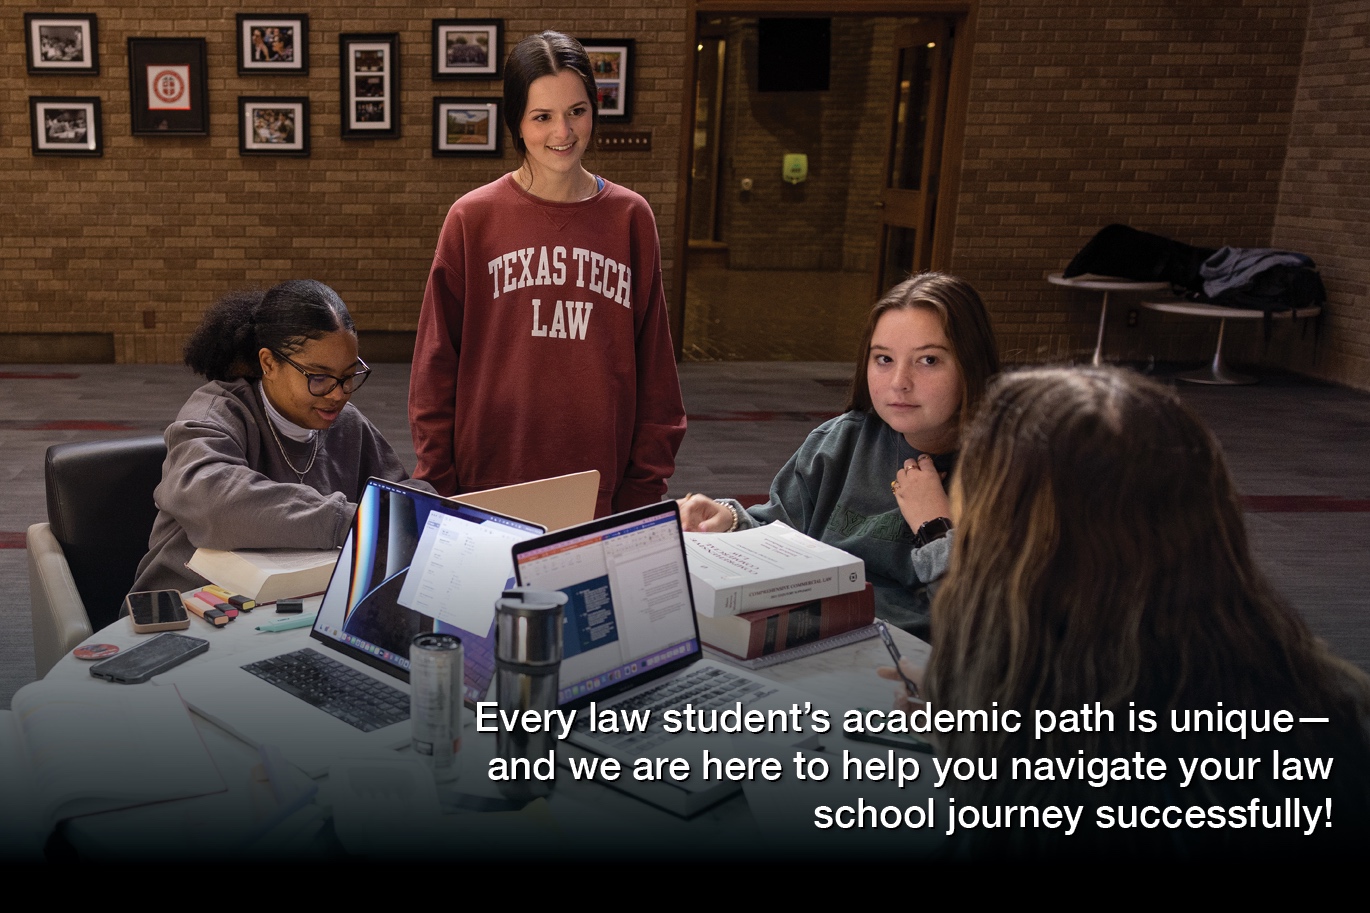 Every law student’s academic path is unique—and we are here to help you navigate your law school journey successfully!